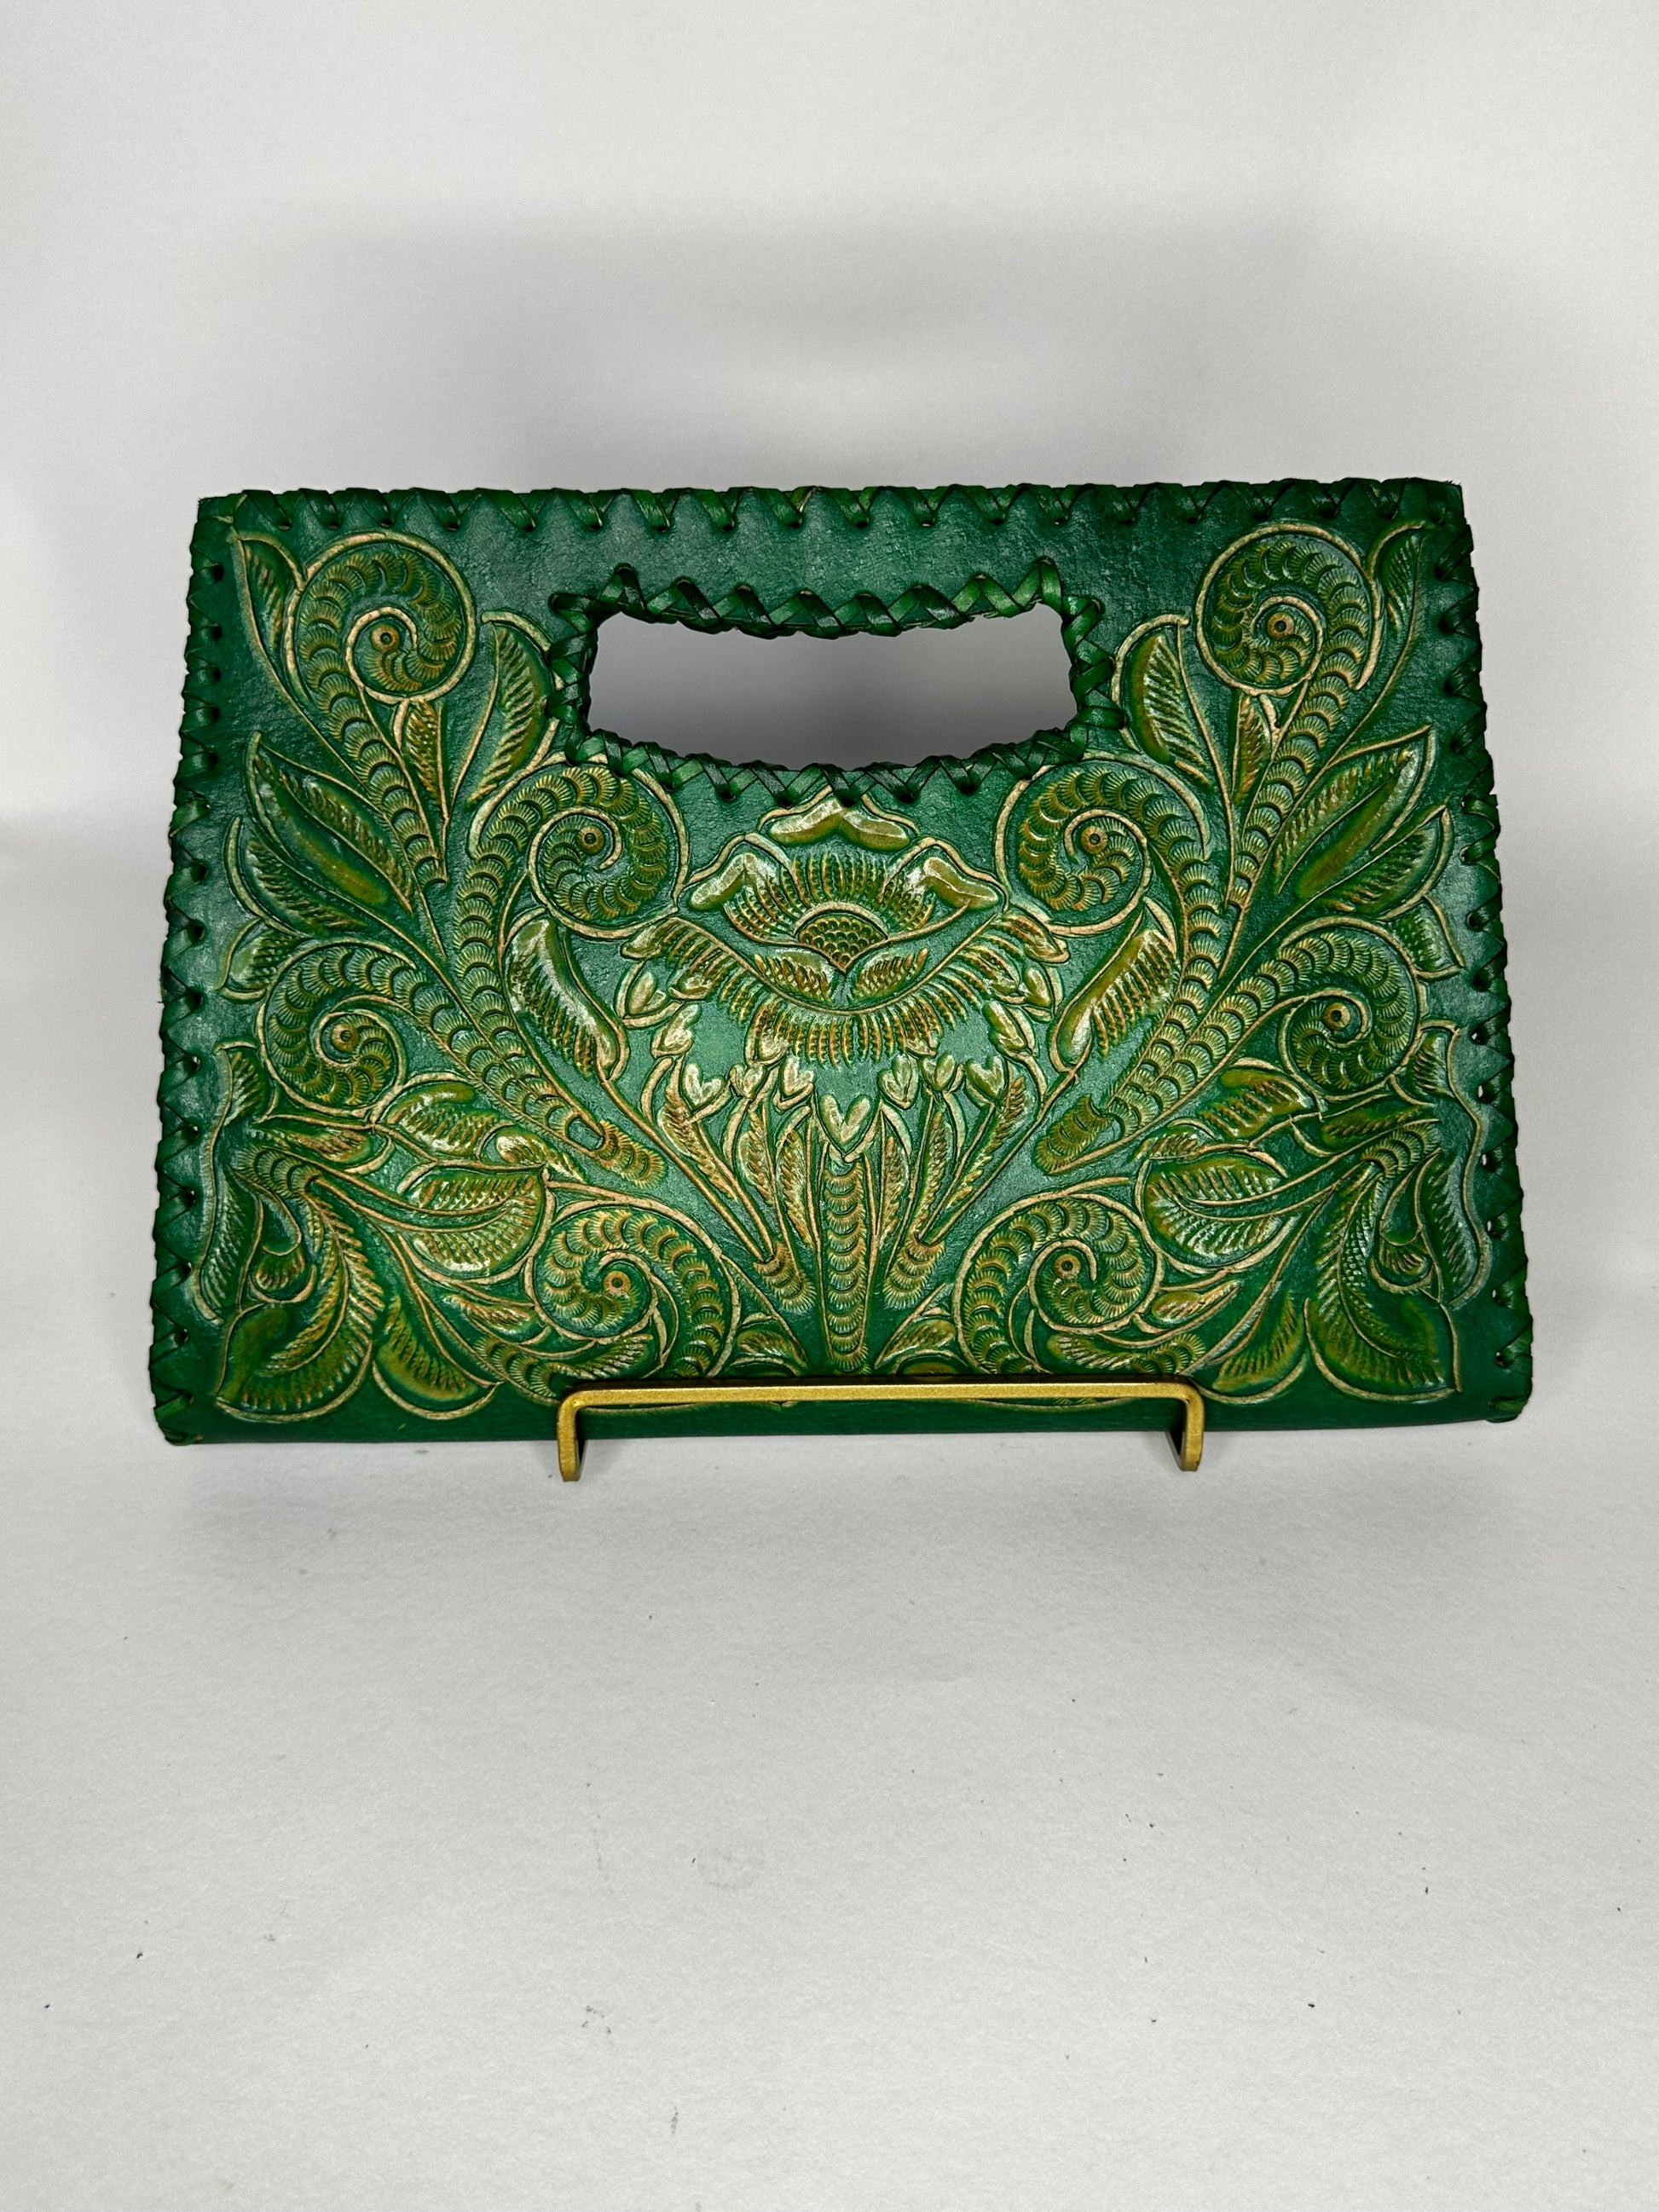 Small Mexican leather handbag with traditional design hand etched throughout the bag. Has handle mid top. leather stitching all around. Color viper green. 